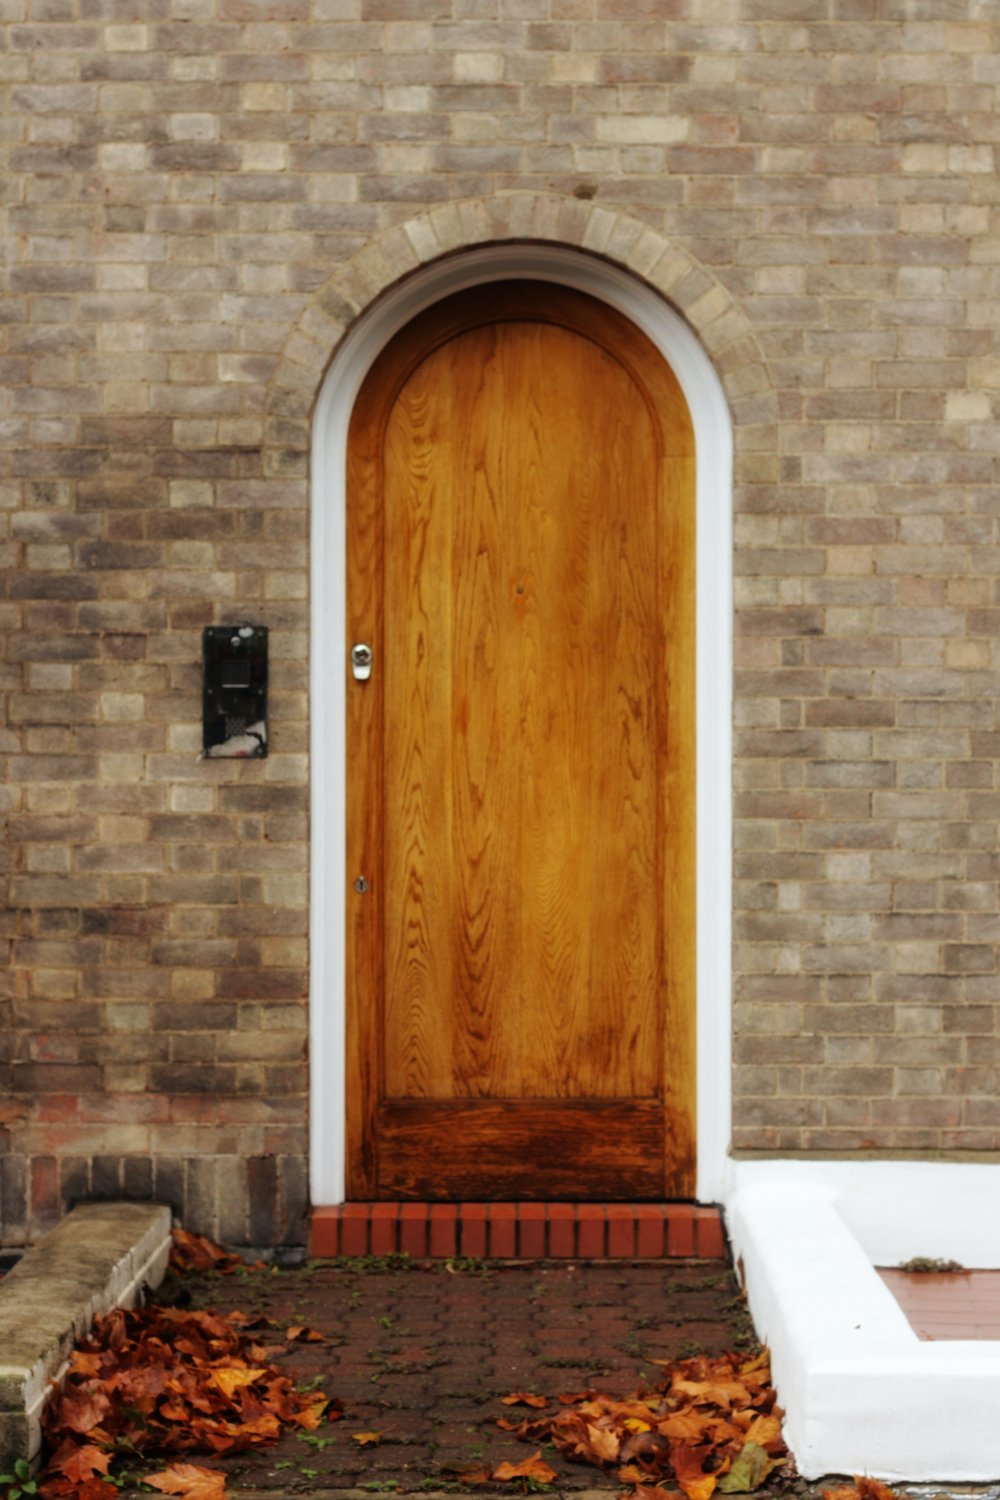 Planning for a new front door?